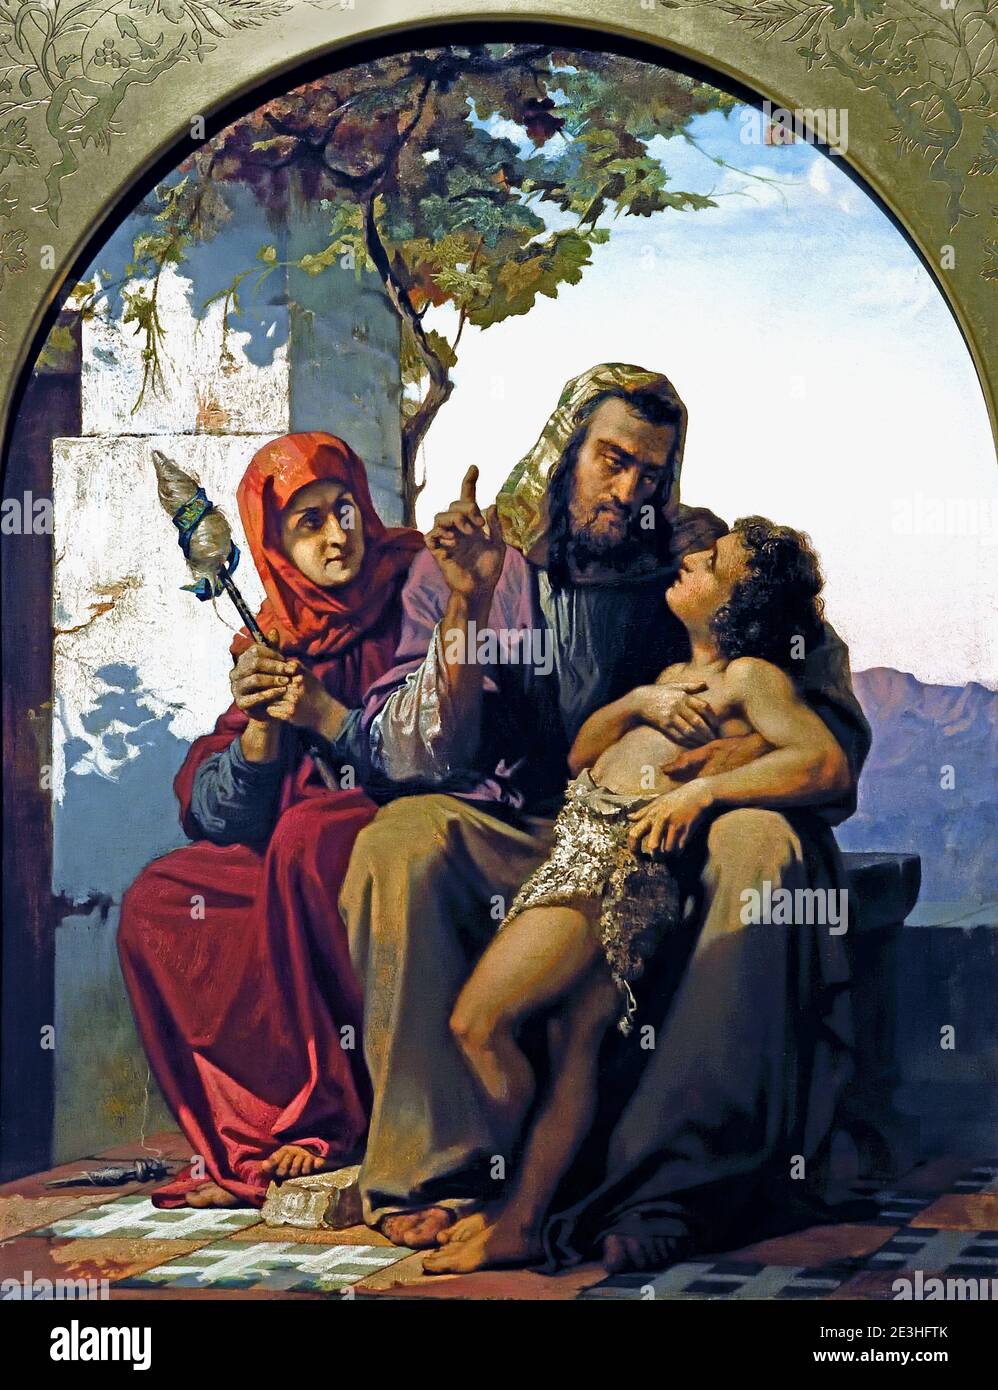 Henri Lehmann 1814-1892 The Education of Tobias 1858 German, Germany, ( The exchange between the blind man and his son is arresting. The scene takes place in front of Tobias’s mother, the quiet and kindly Anna, who is holding a distaff. ) Stock Photo